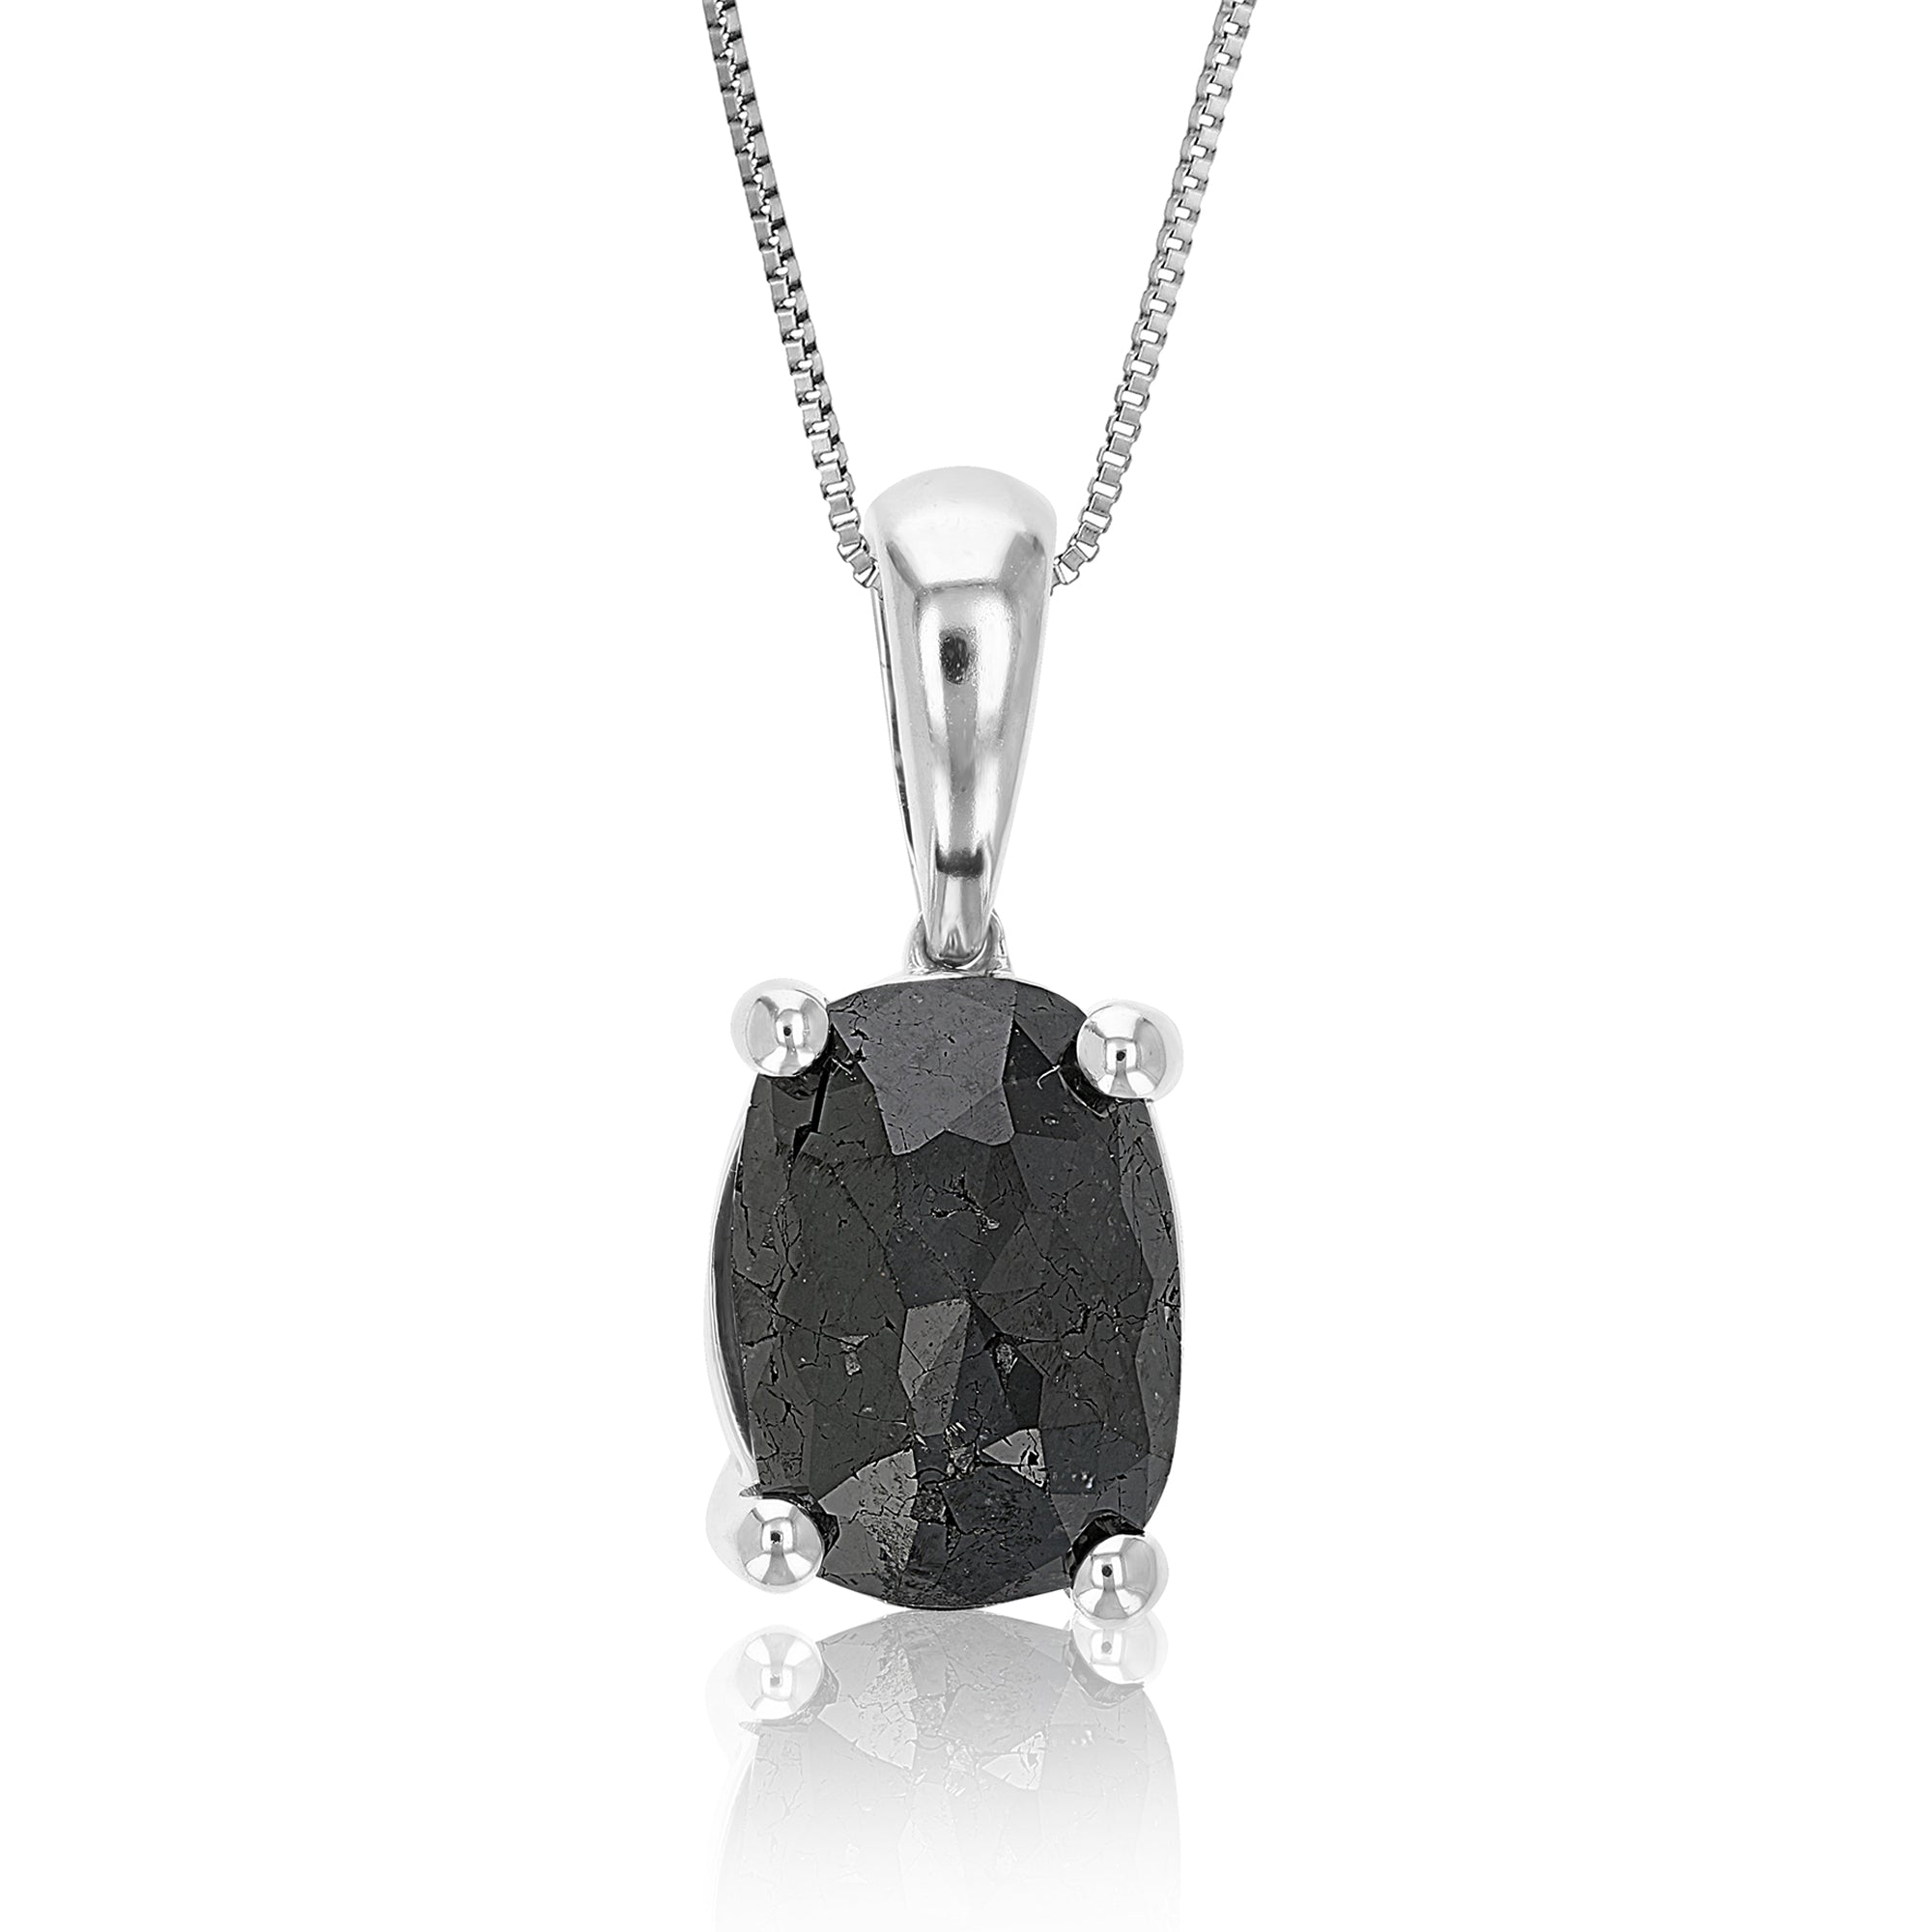 2 cttw Diamond Pendant, Black Diamond Oval Shape Pendant Necklace for Women in .925 Sterling Silver with 18 Inch Chain, Prong Setting